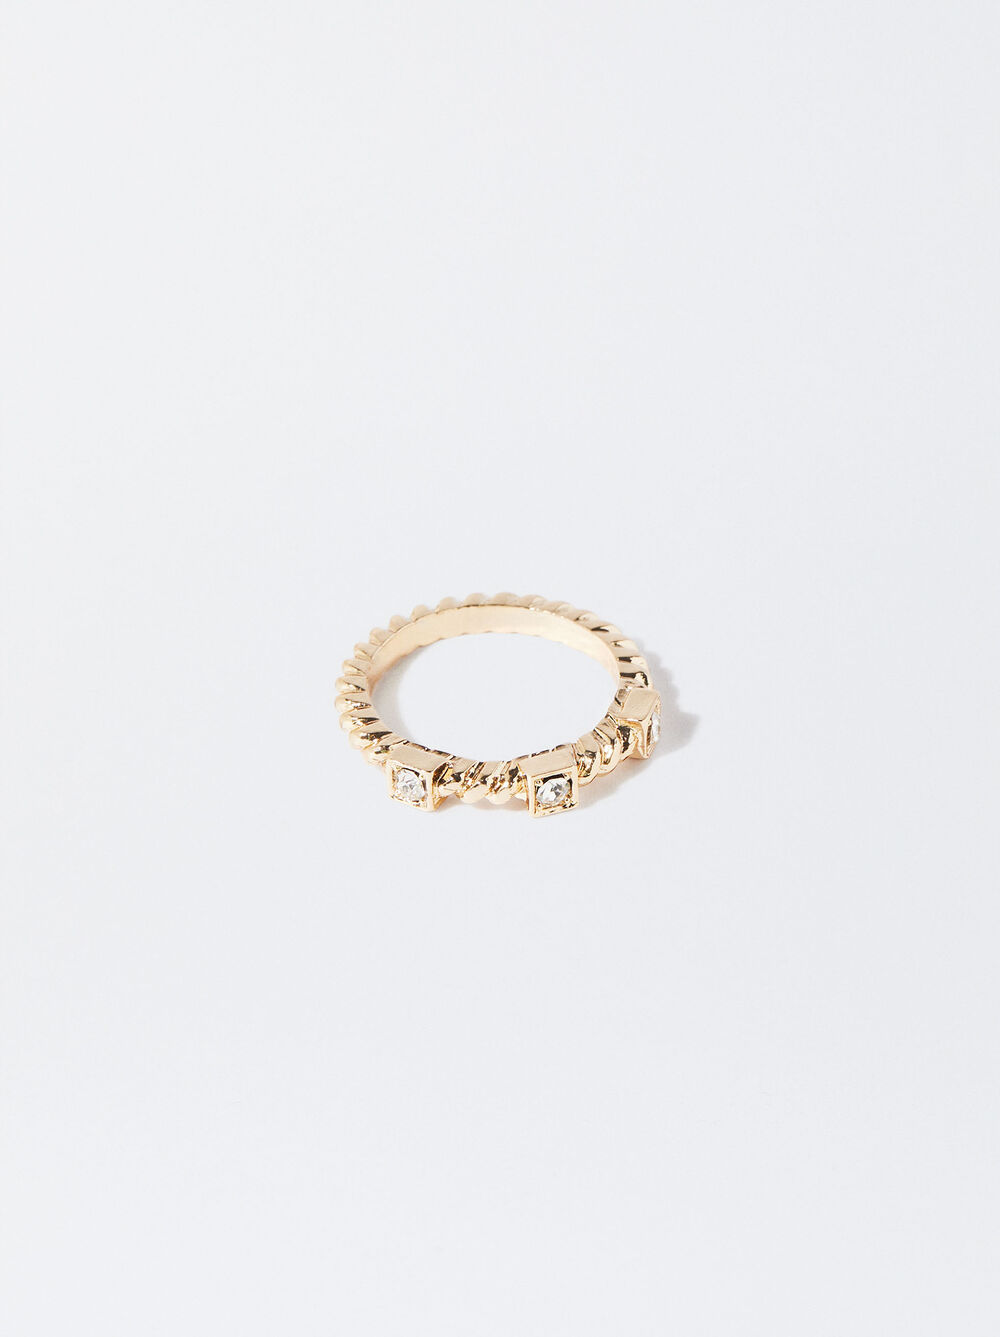 Golden Ring With Crystals